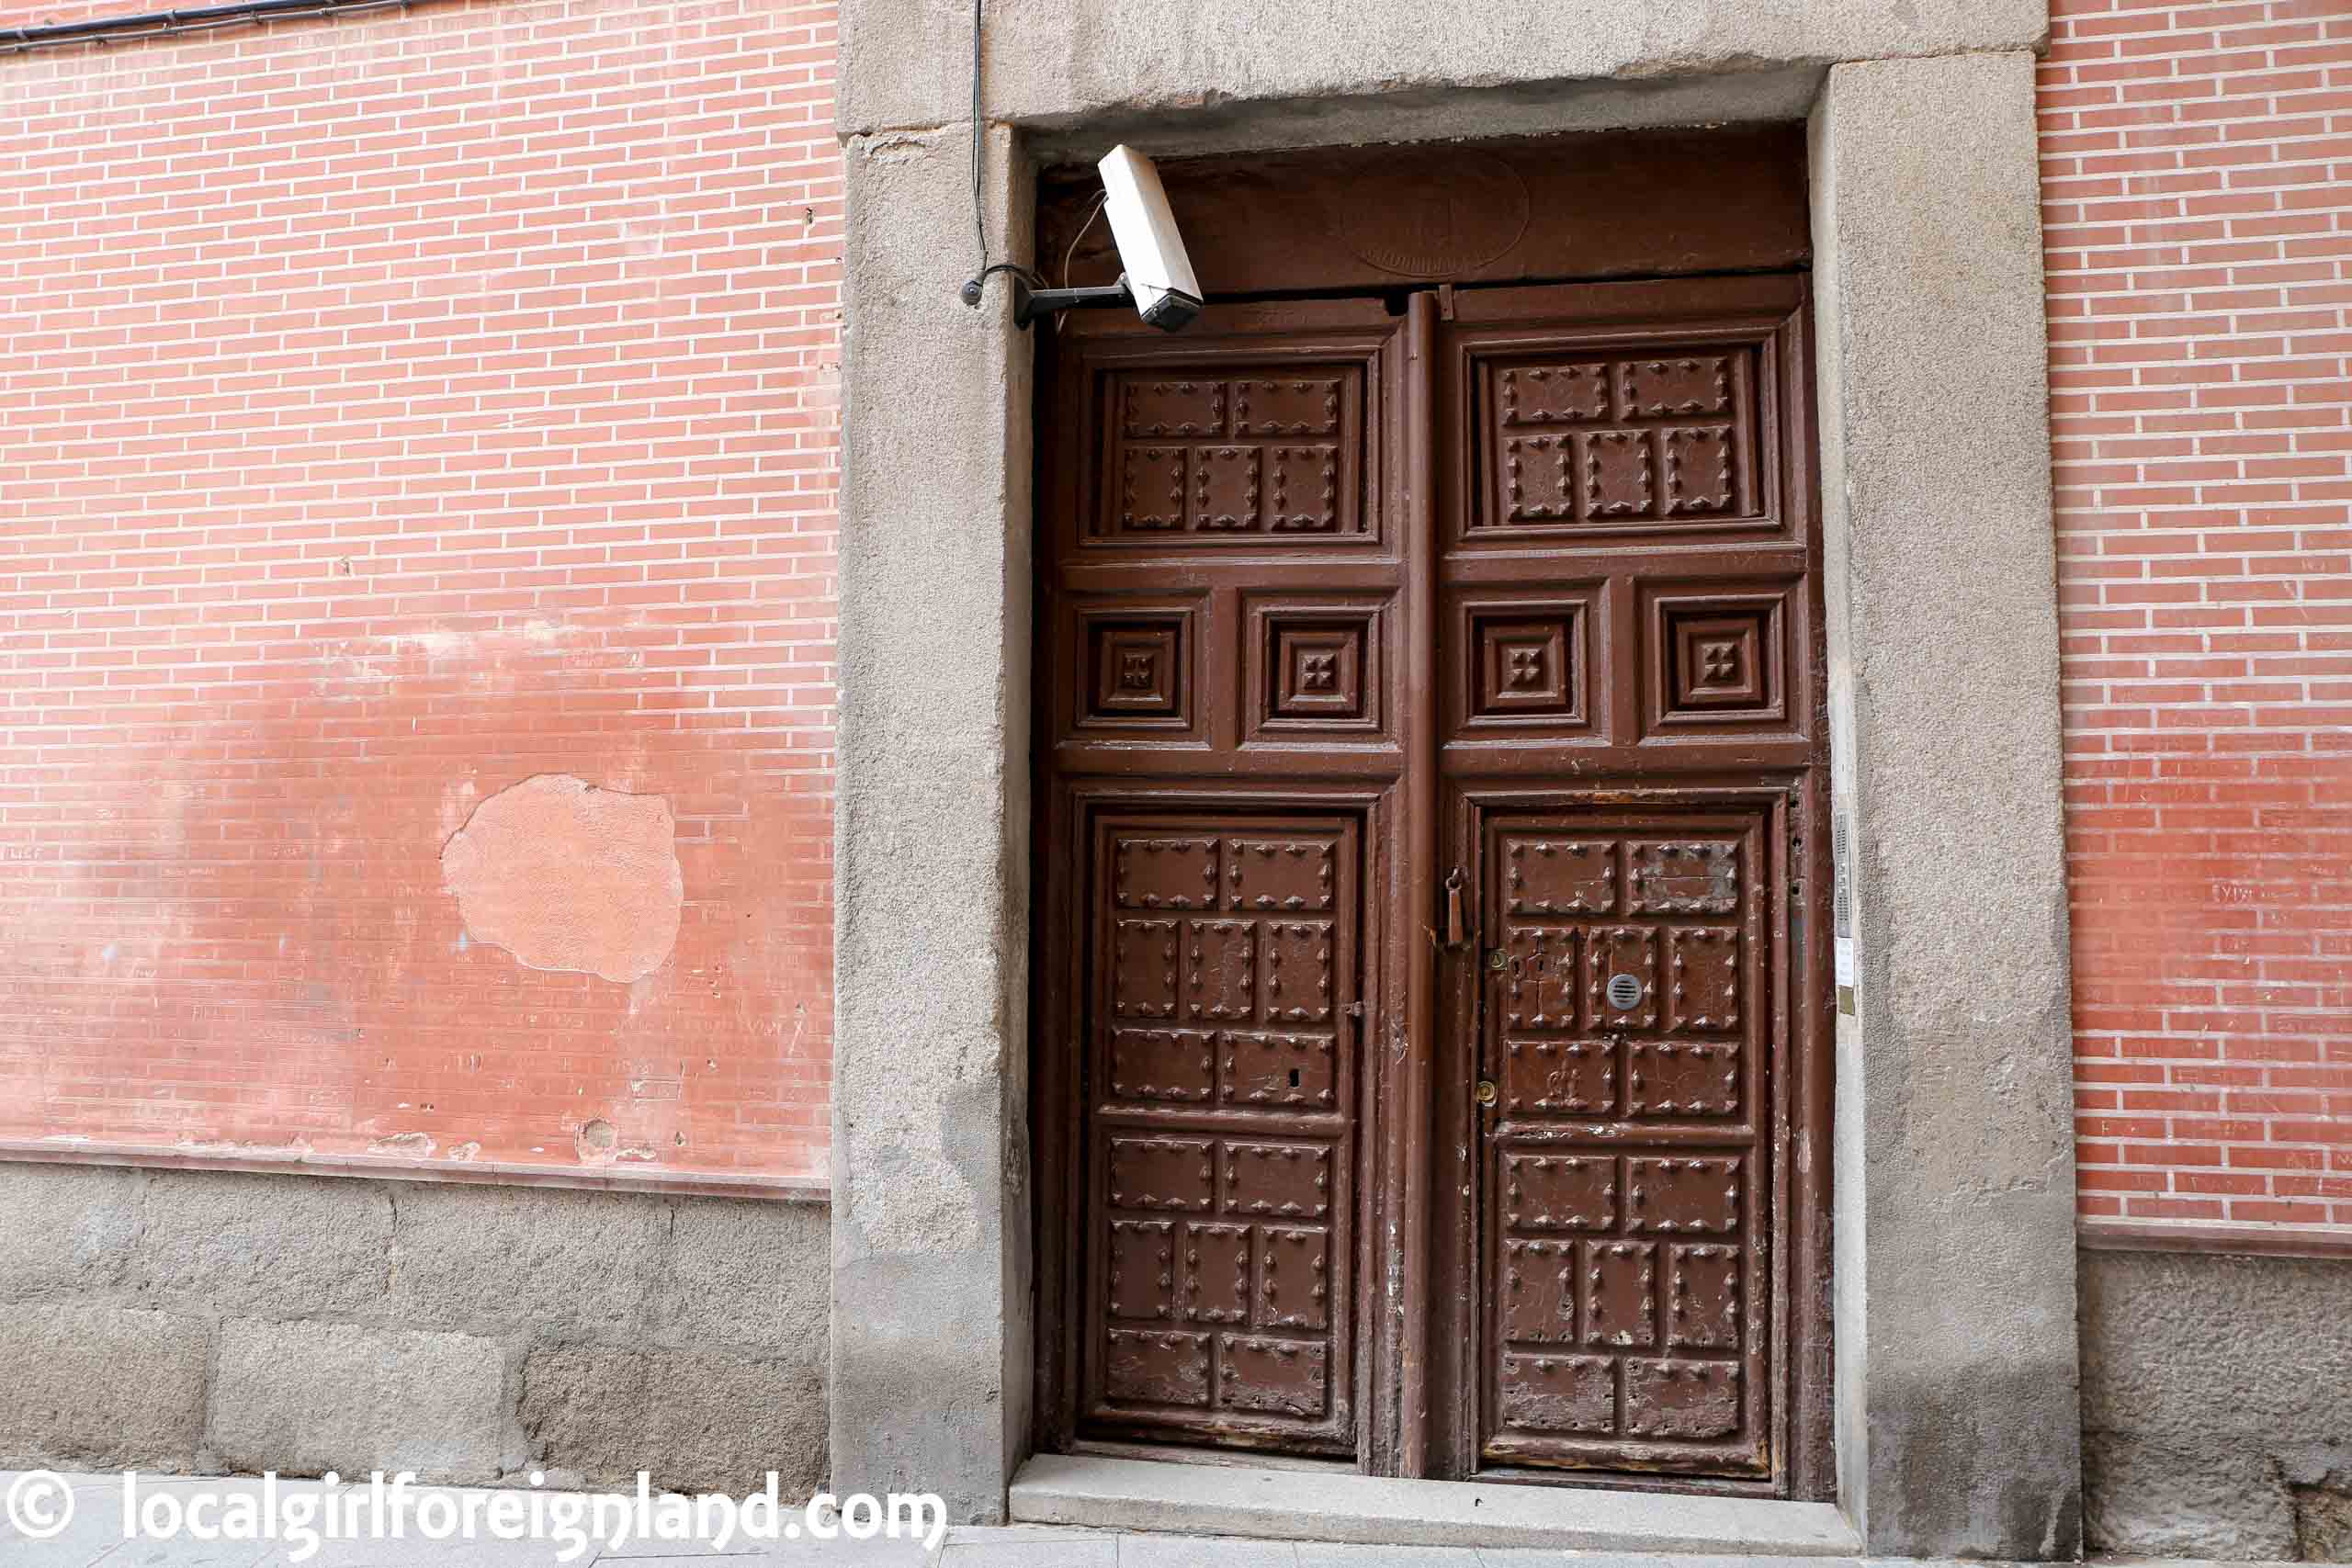 3 Calle del Codo, Madrid, secret cookies baked by cloistered nun